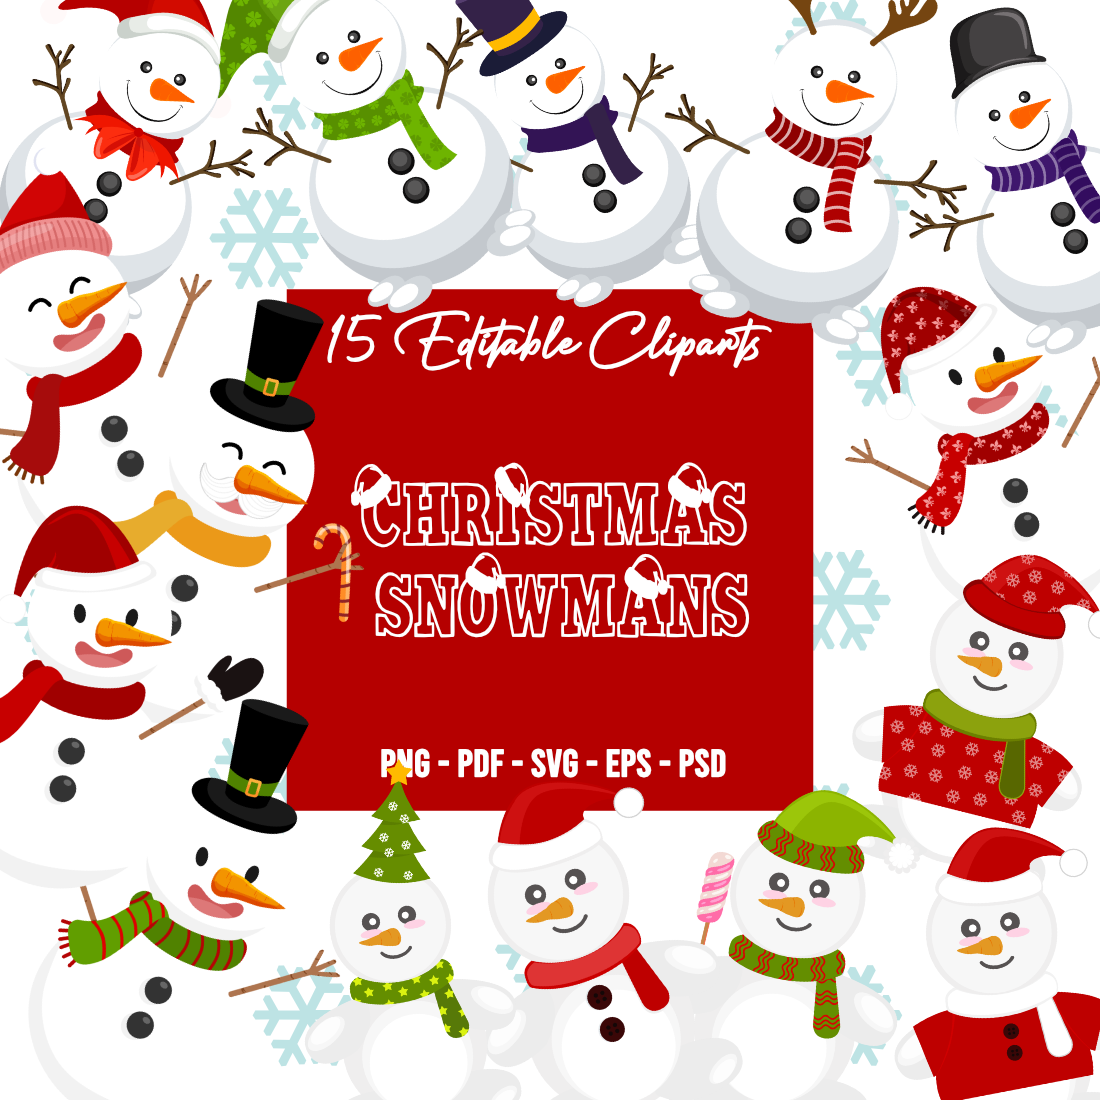 15 Christmas Snowman Cliparts preview image.